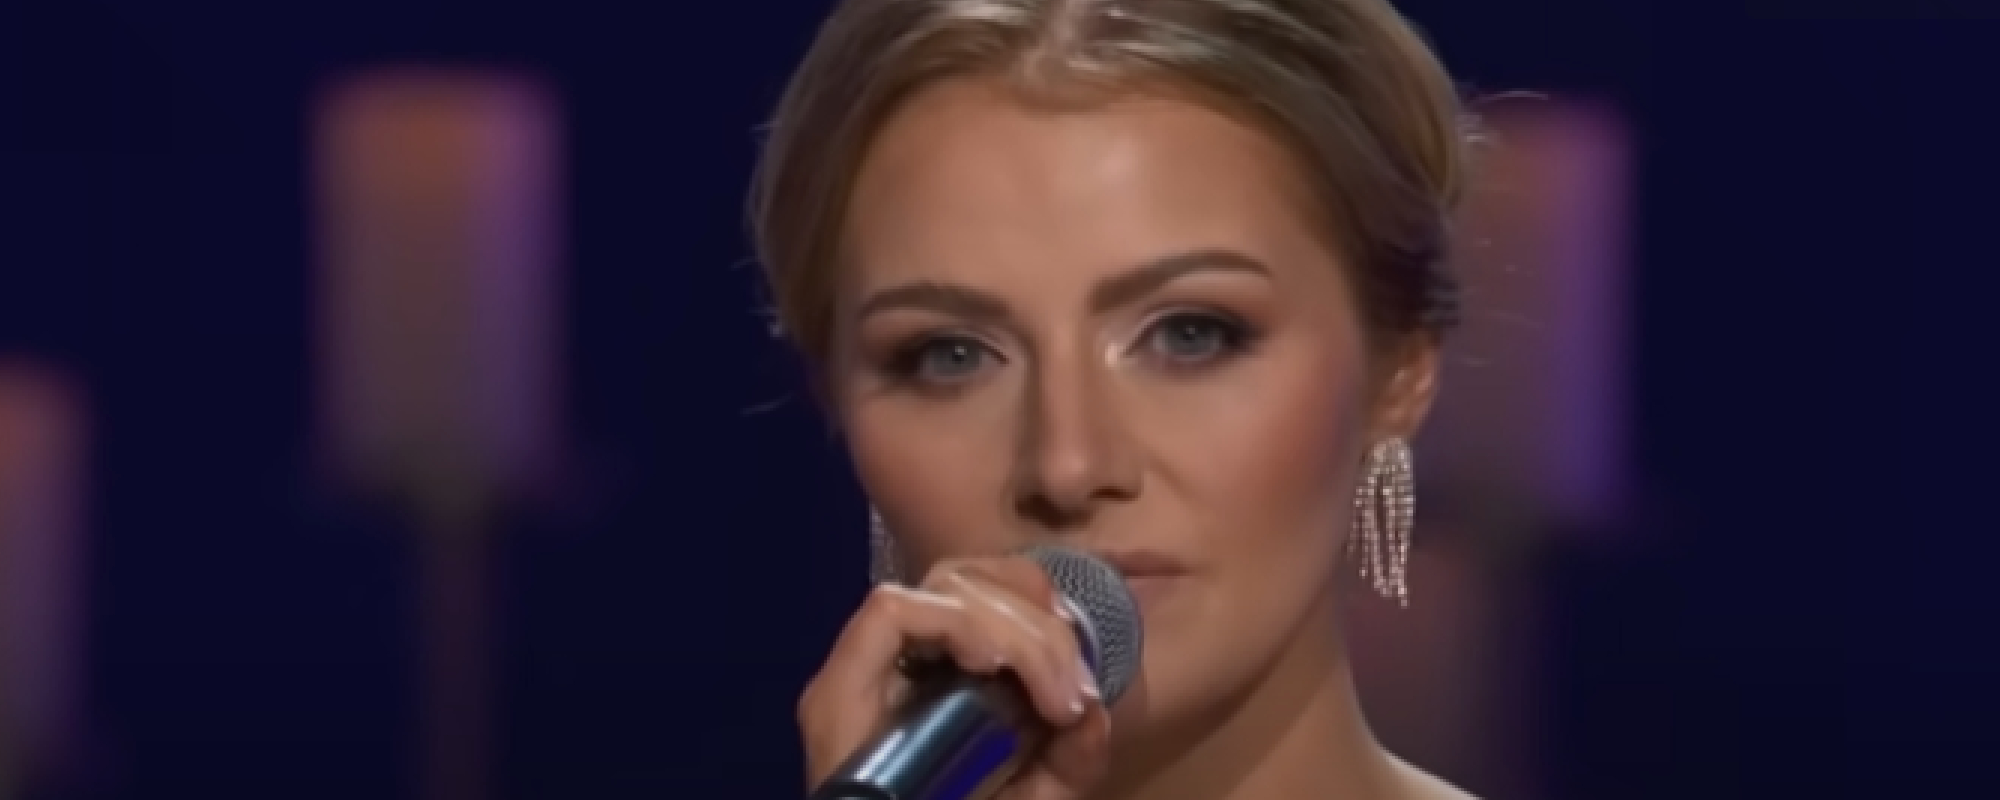 Emmy Russell Looks To Become the Next 'American Idol' but Needs Your Help - Here's How to Vote